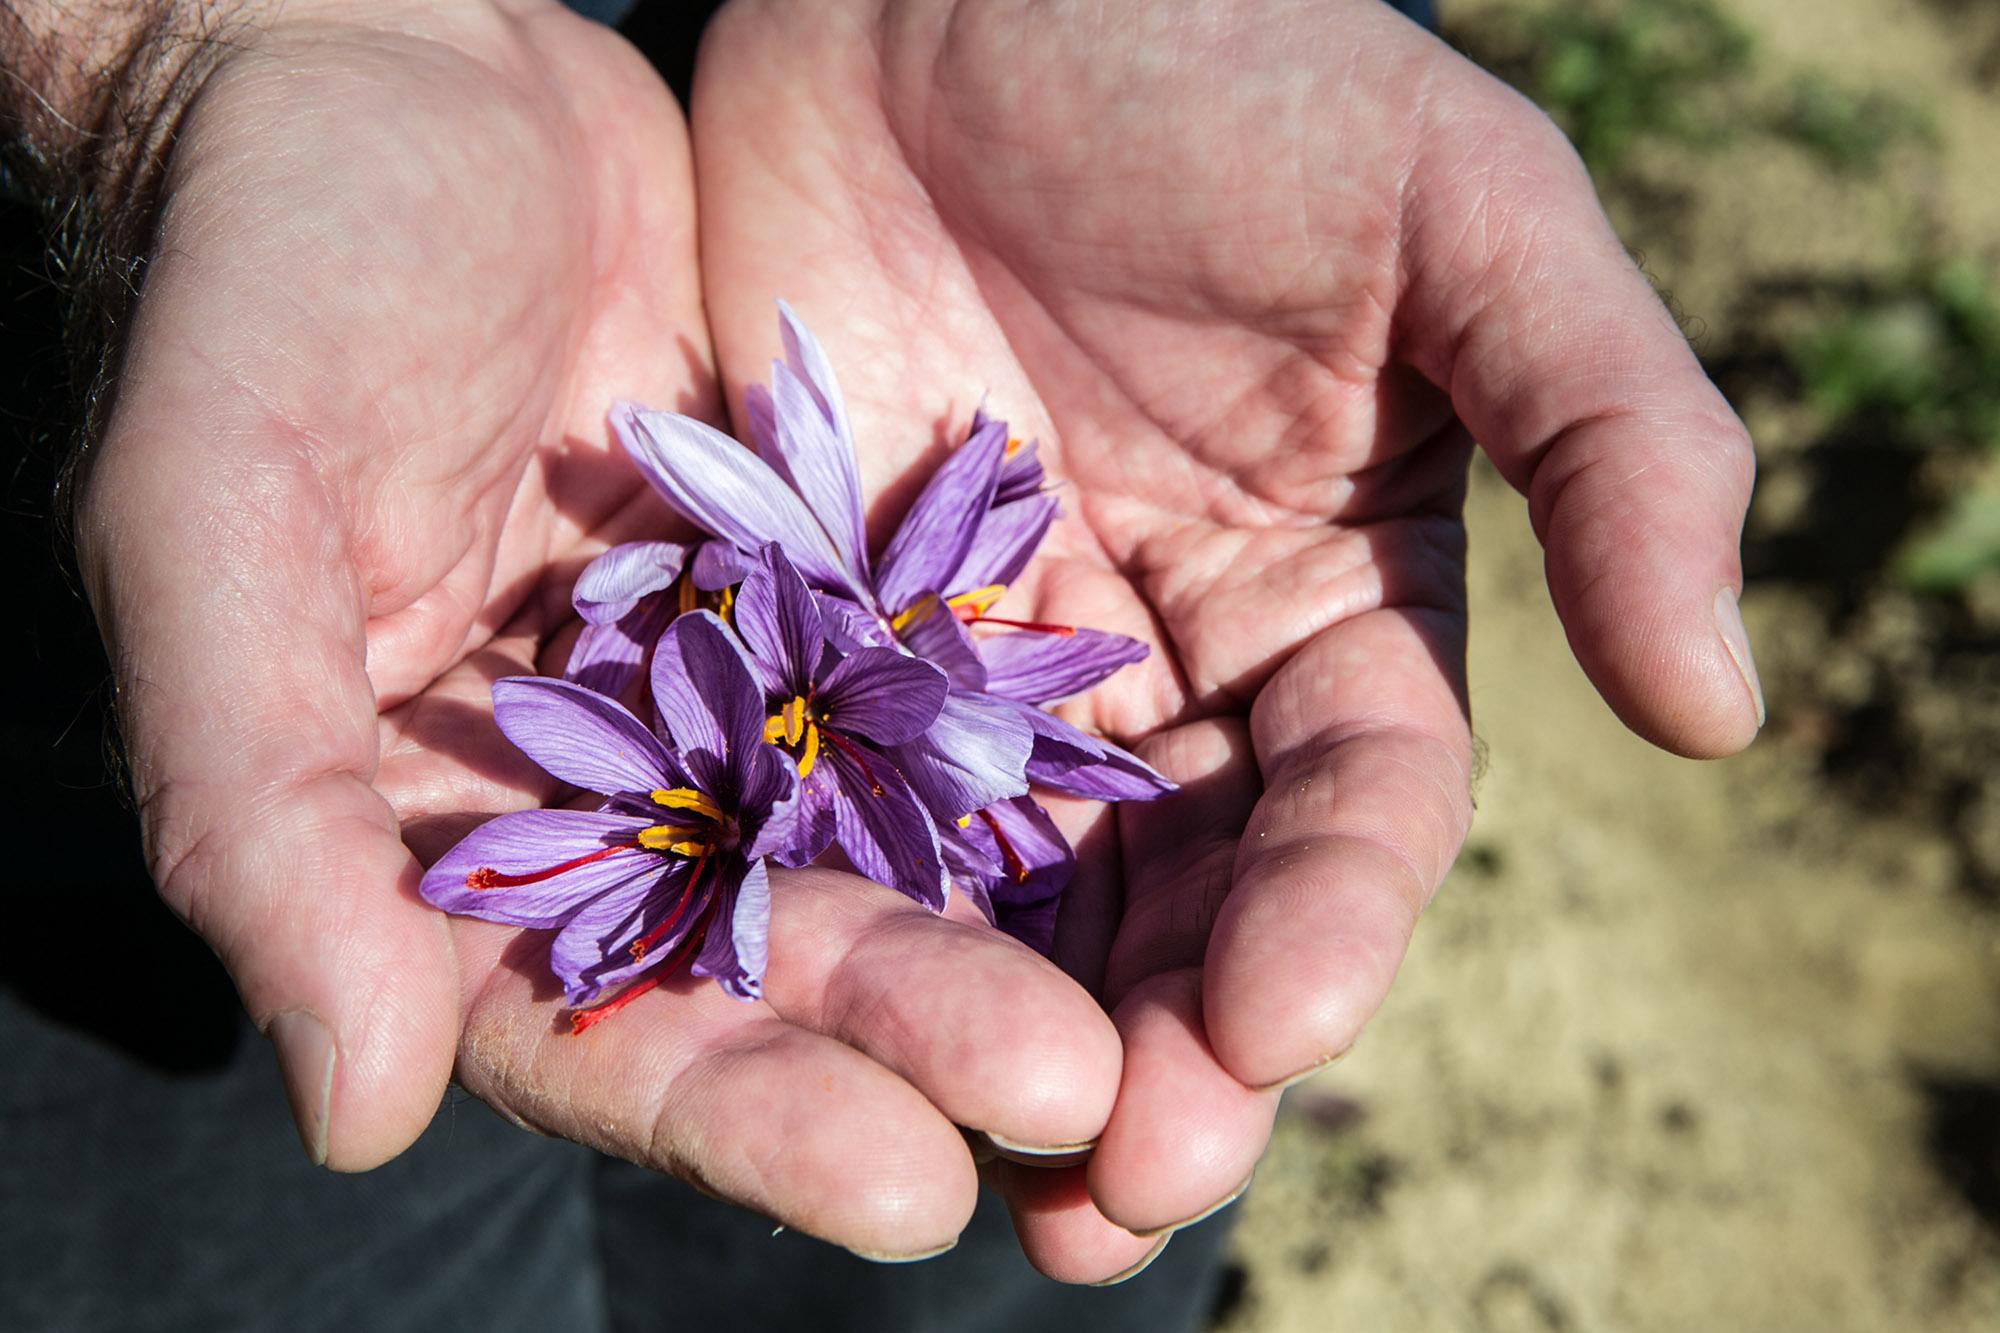 The violet saffron flower is beautiful, but the precious part is just the little red stigmas. © Francesca Pagliai